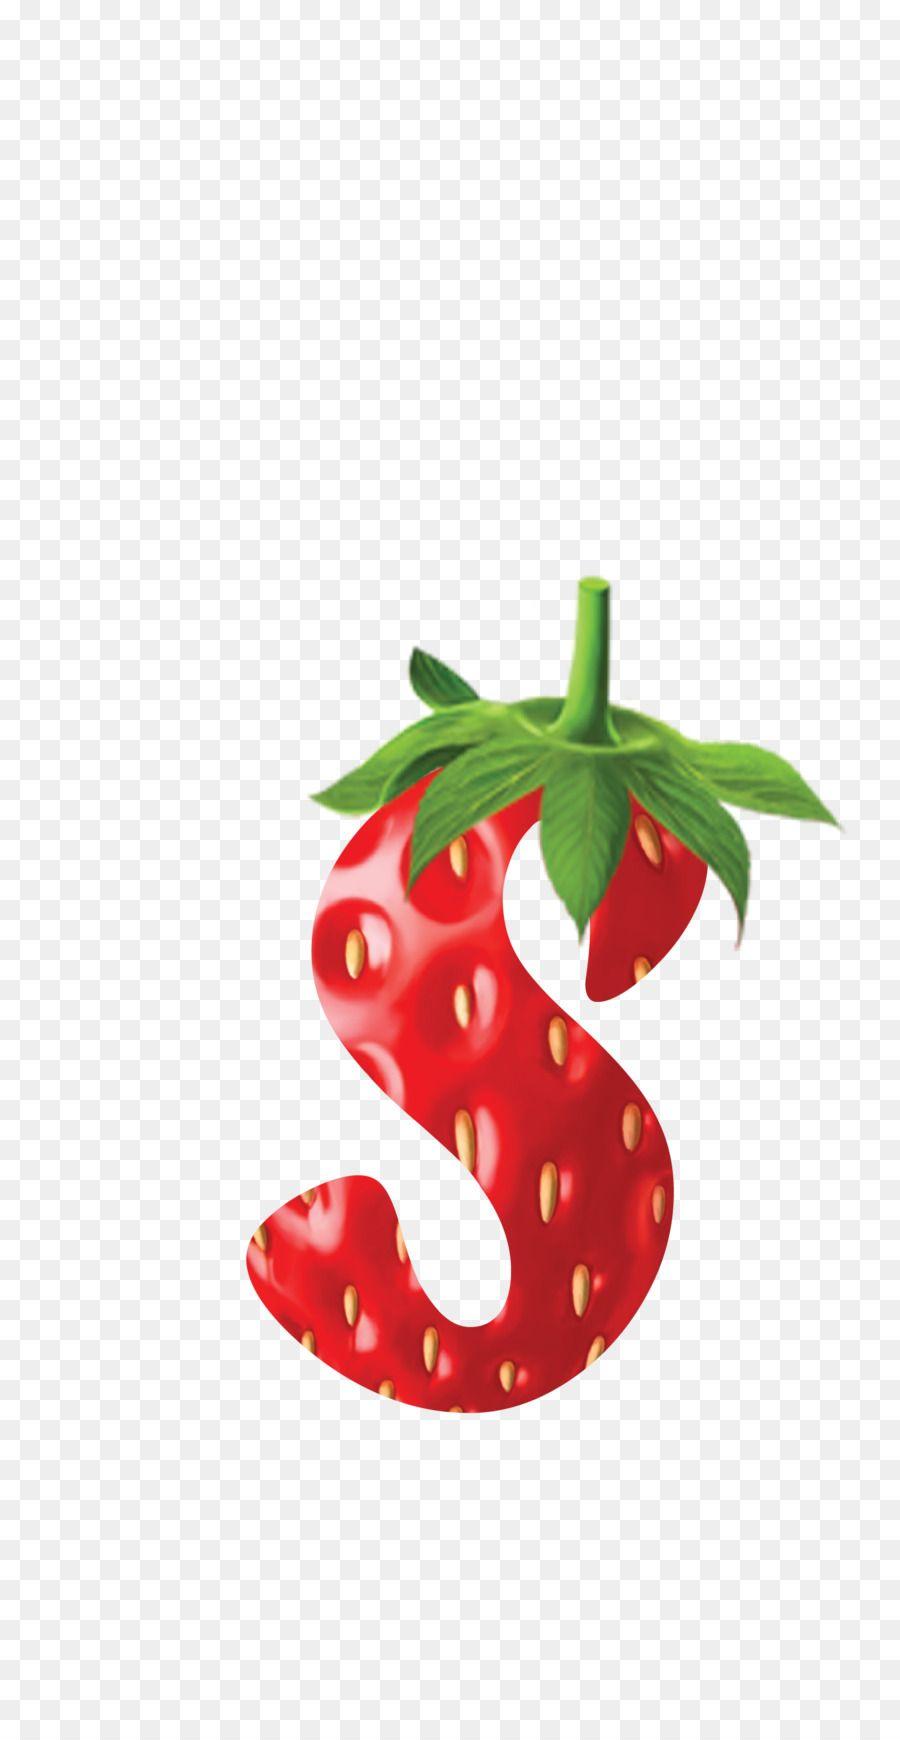 Strawberry Logo - Strawberry Christmas Ornament png download - 1541*2963 - Free ...